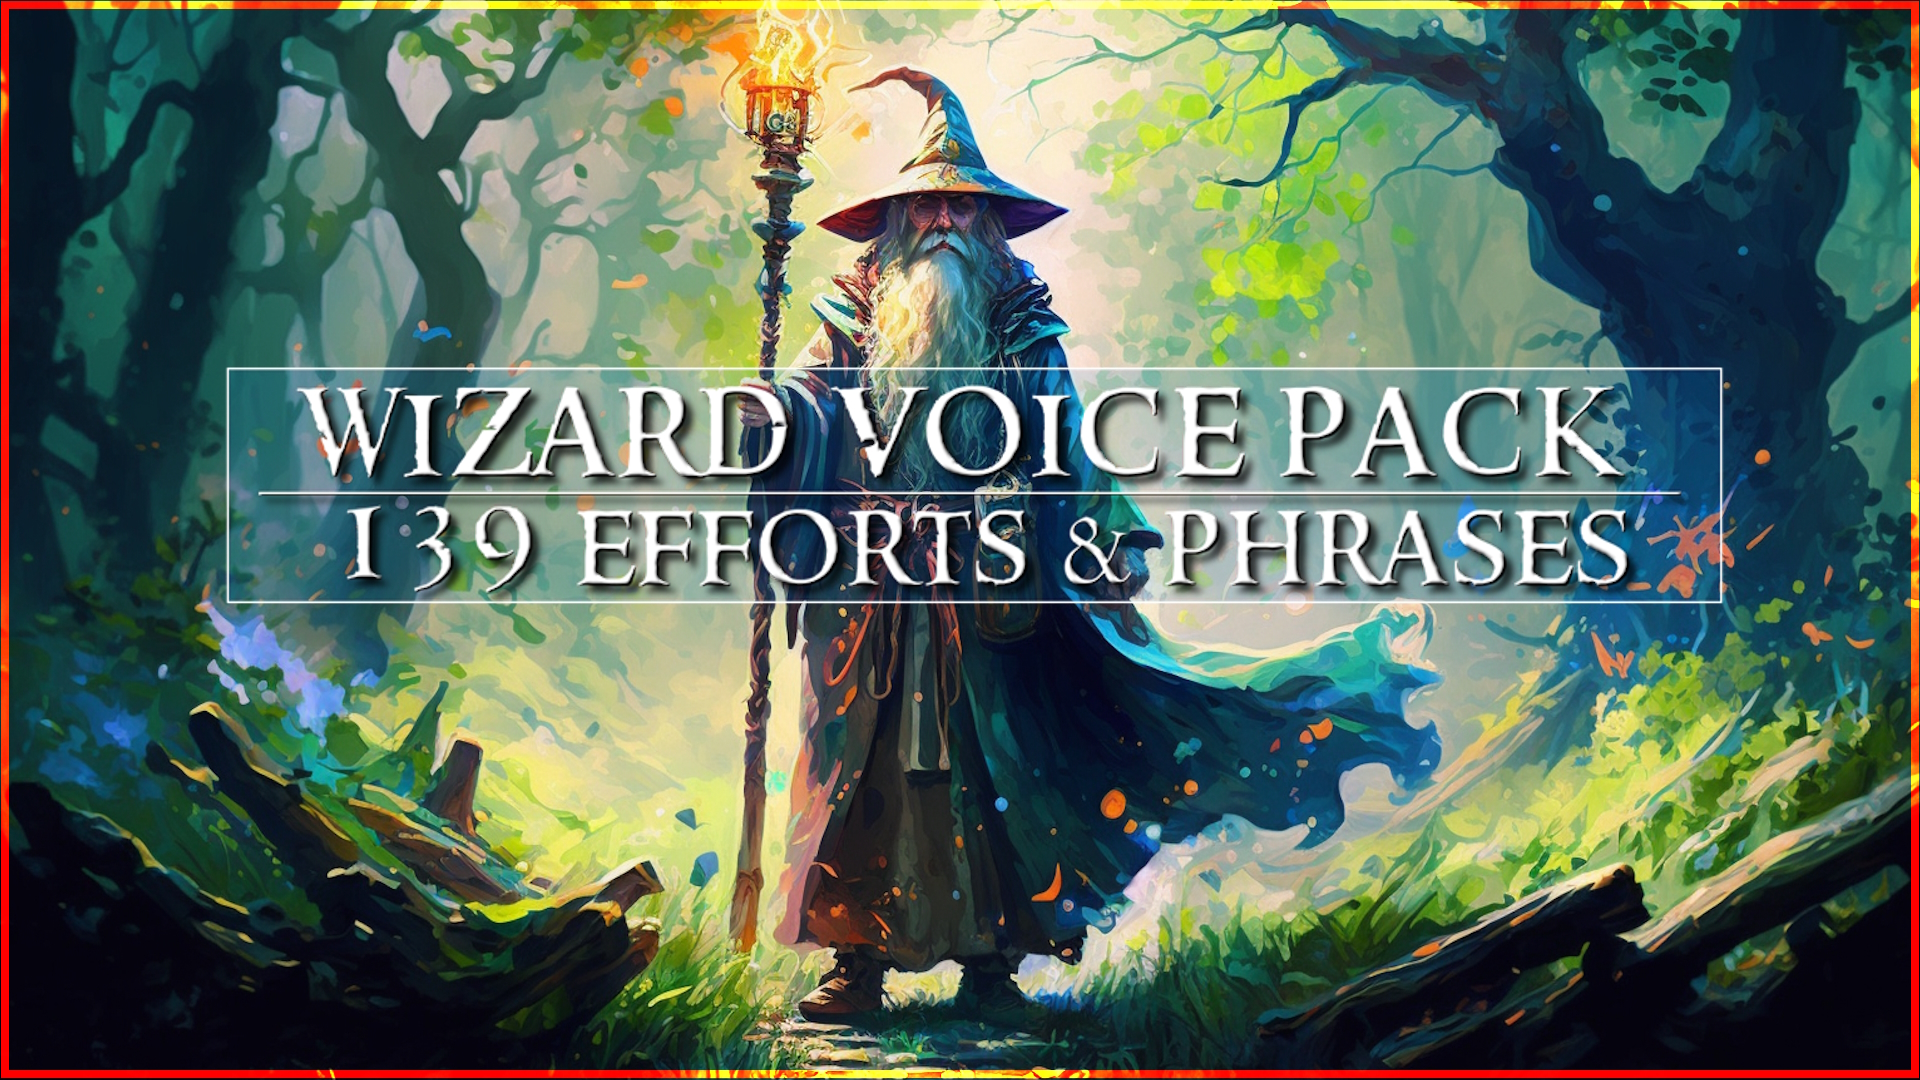 Wizard Voice Pack Of 139 Efforts and Phrases